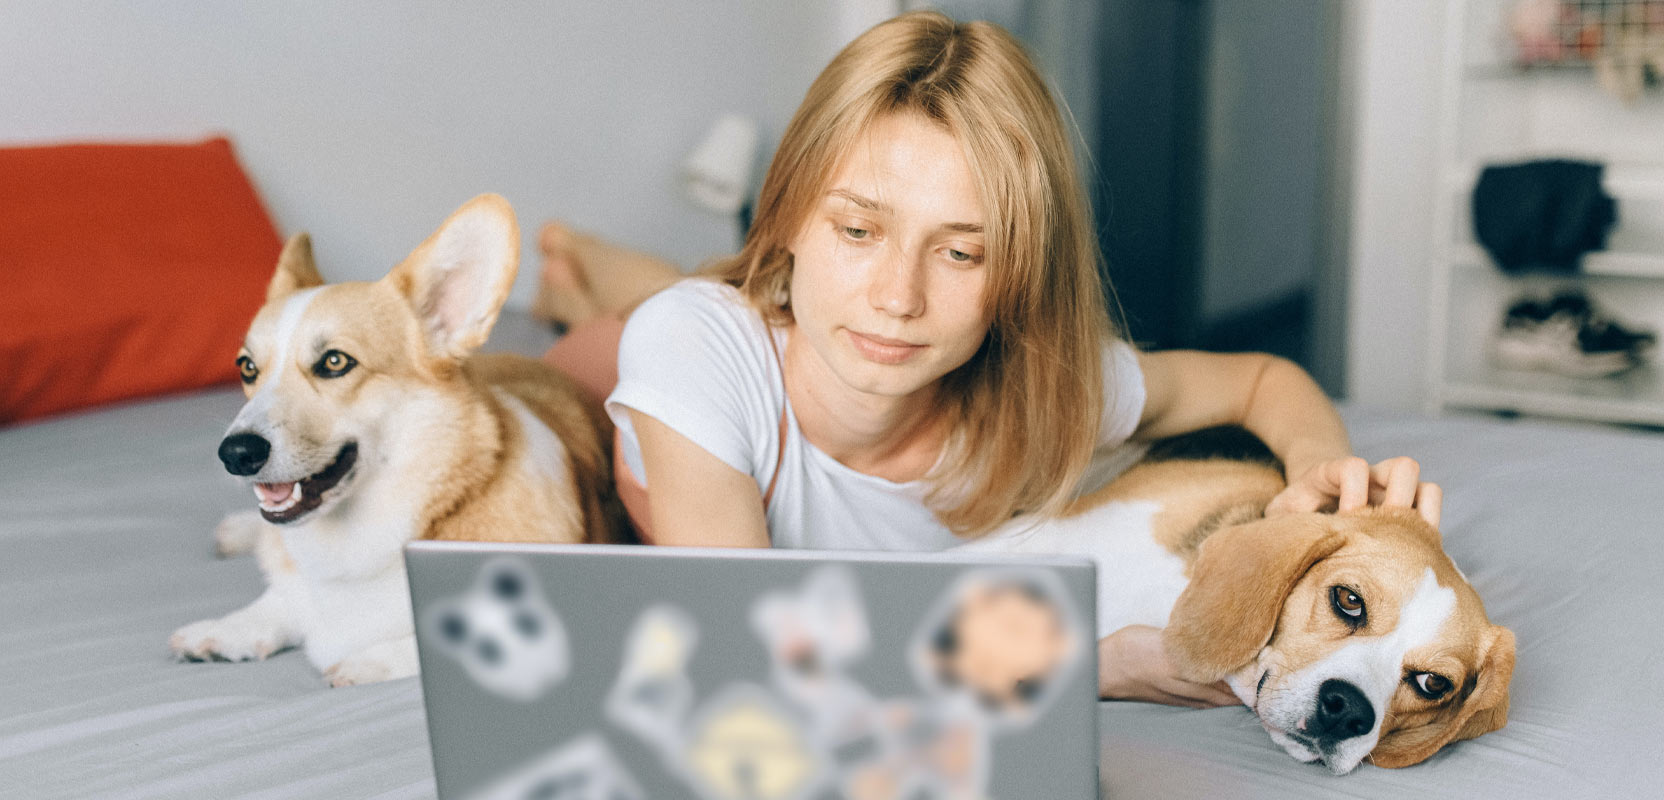 Woman lying on a bed between two dogs, looking at a laptop